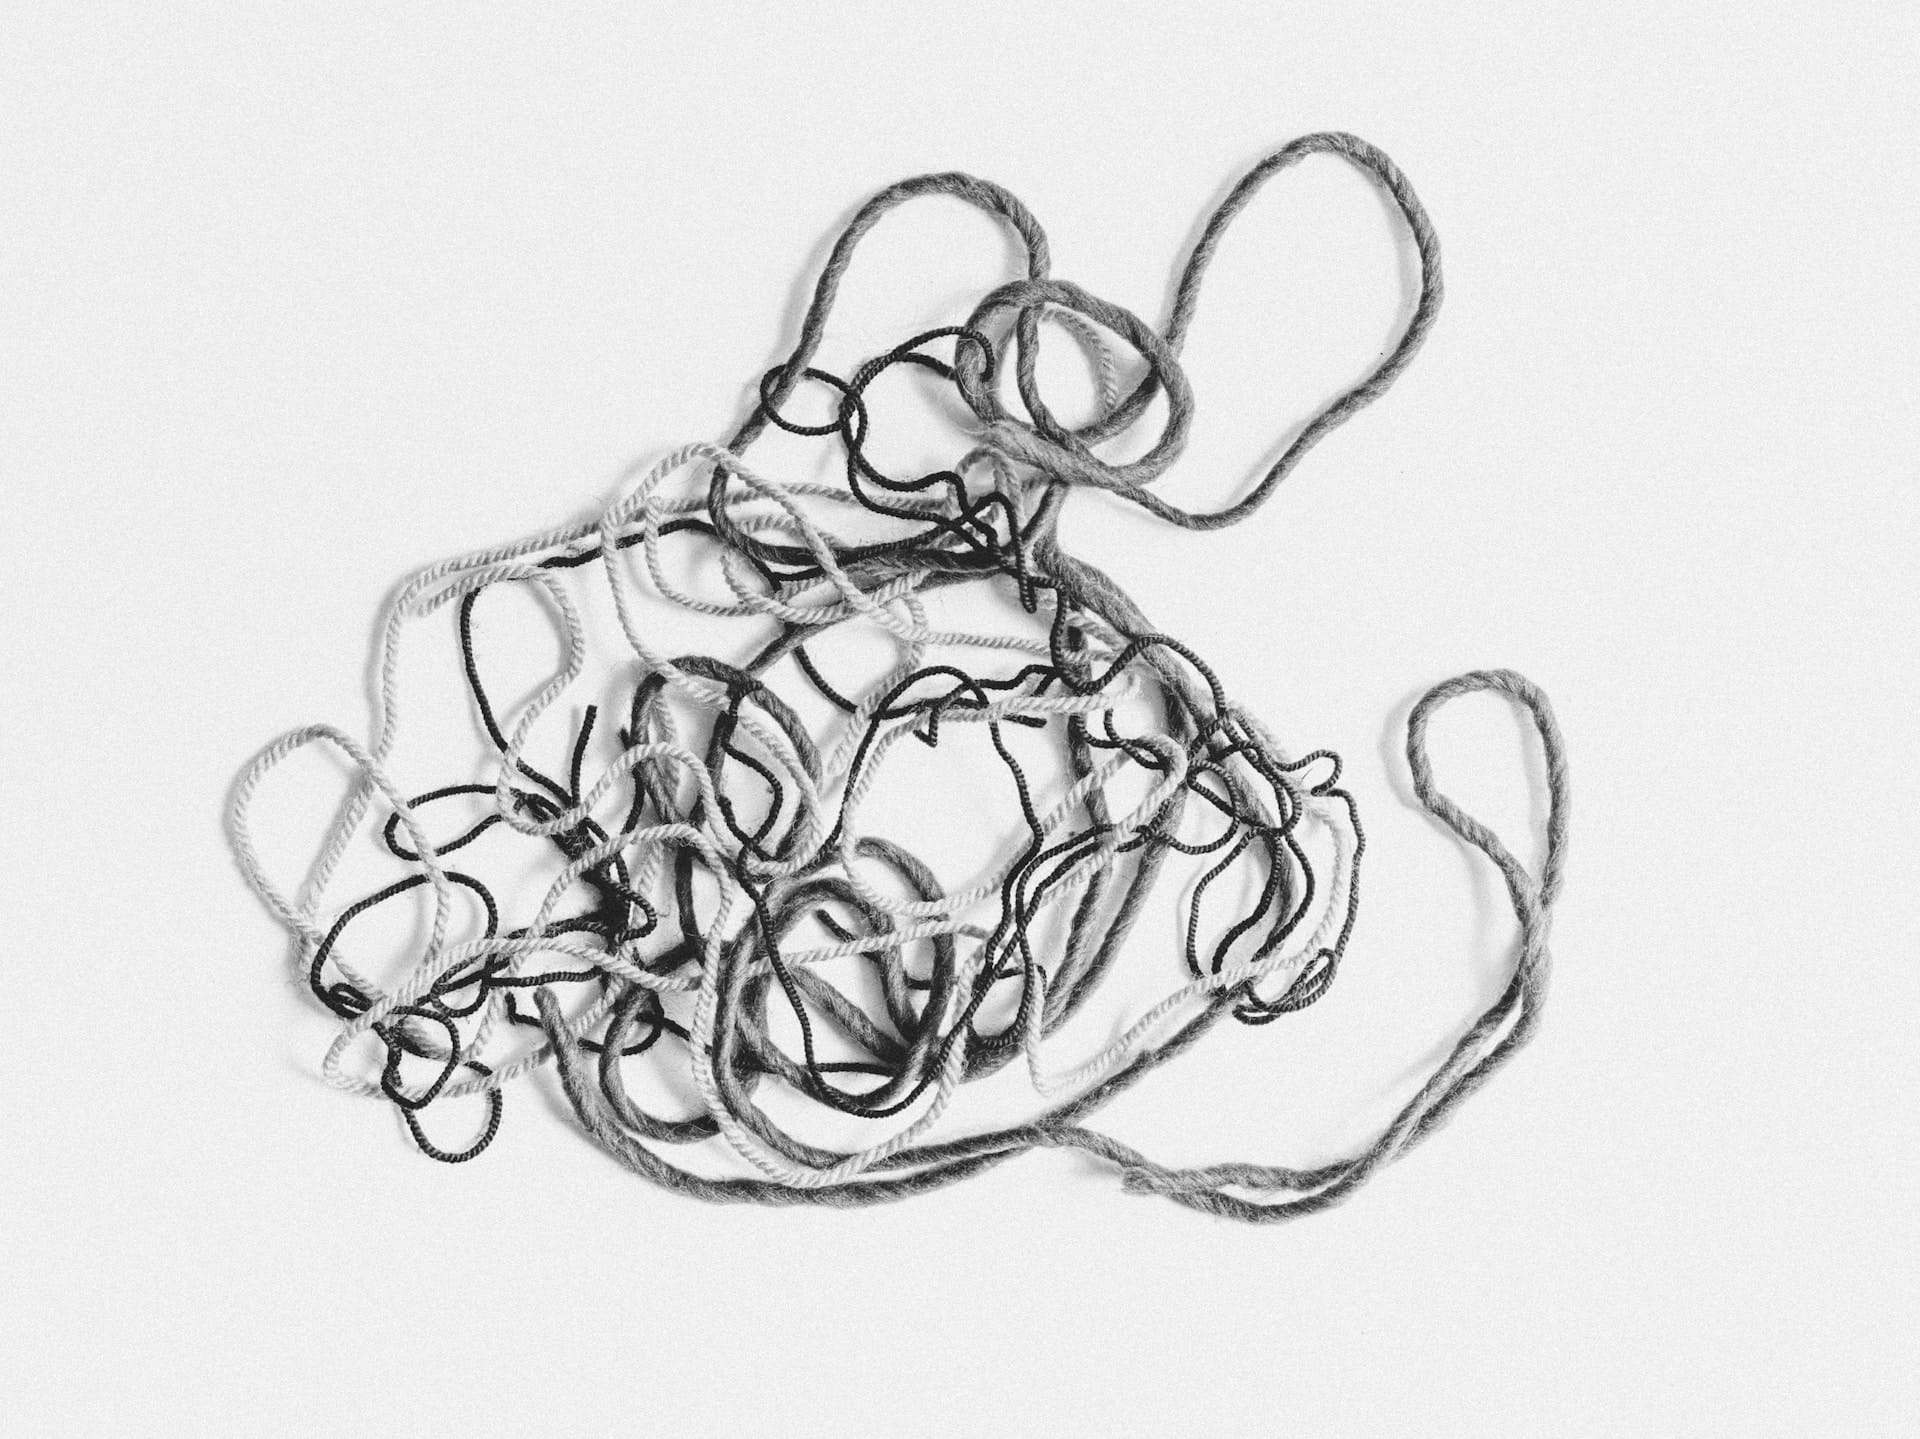 A grayscale image of tangled yarn, symbolizing the complex and intertwined nature of thoughts within the subconscious mind. The monochromatic tones highlight the yarn's intricate patterns and knots, visually representing the journey of unraveling and understanding one's inner thoughts and feelings through introspection.